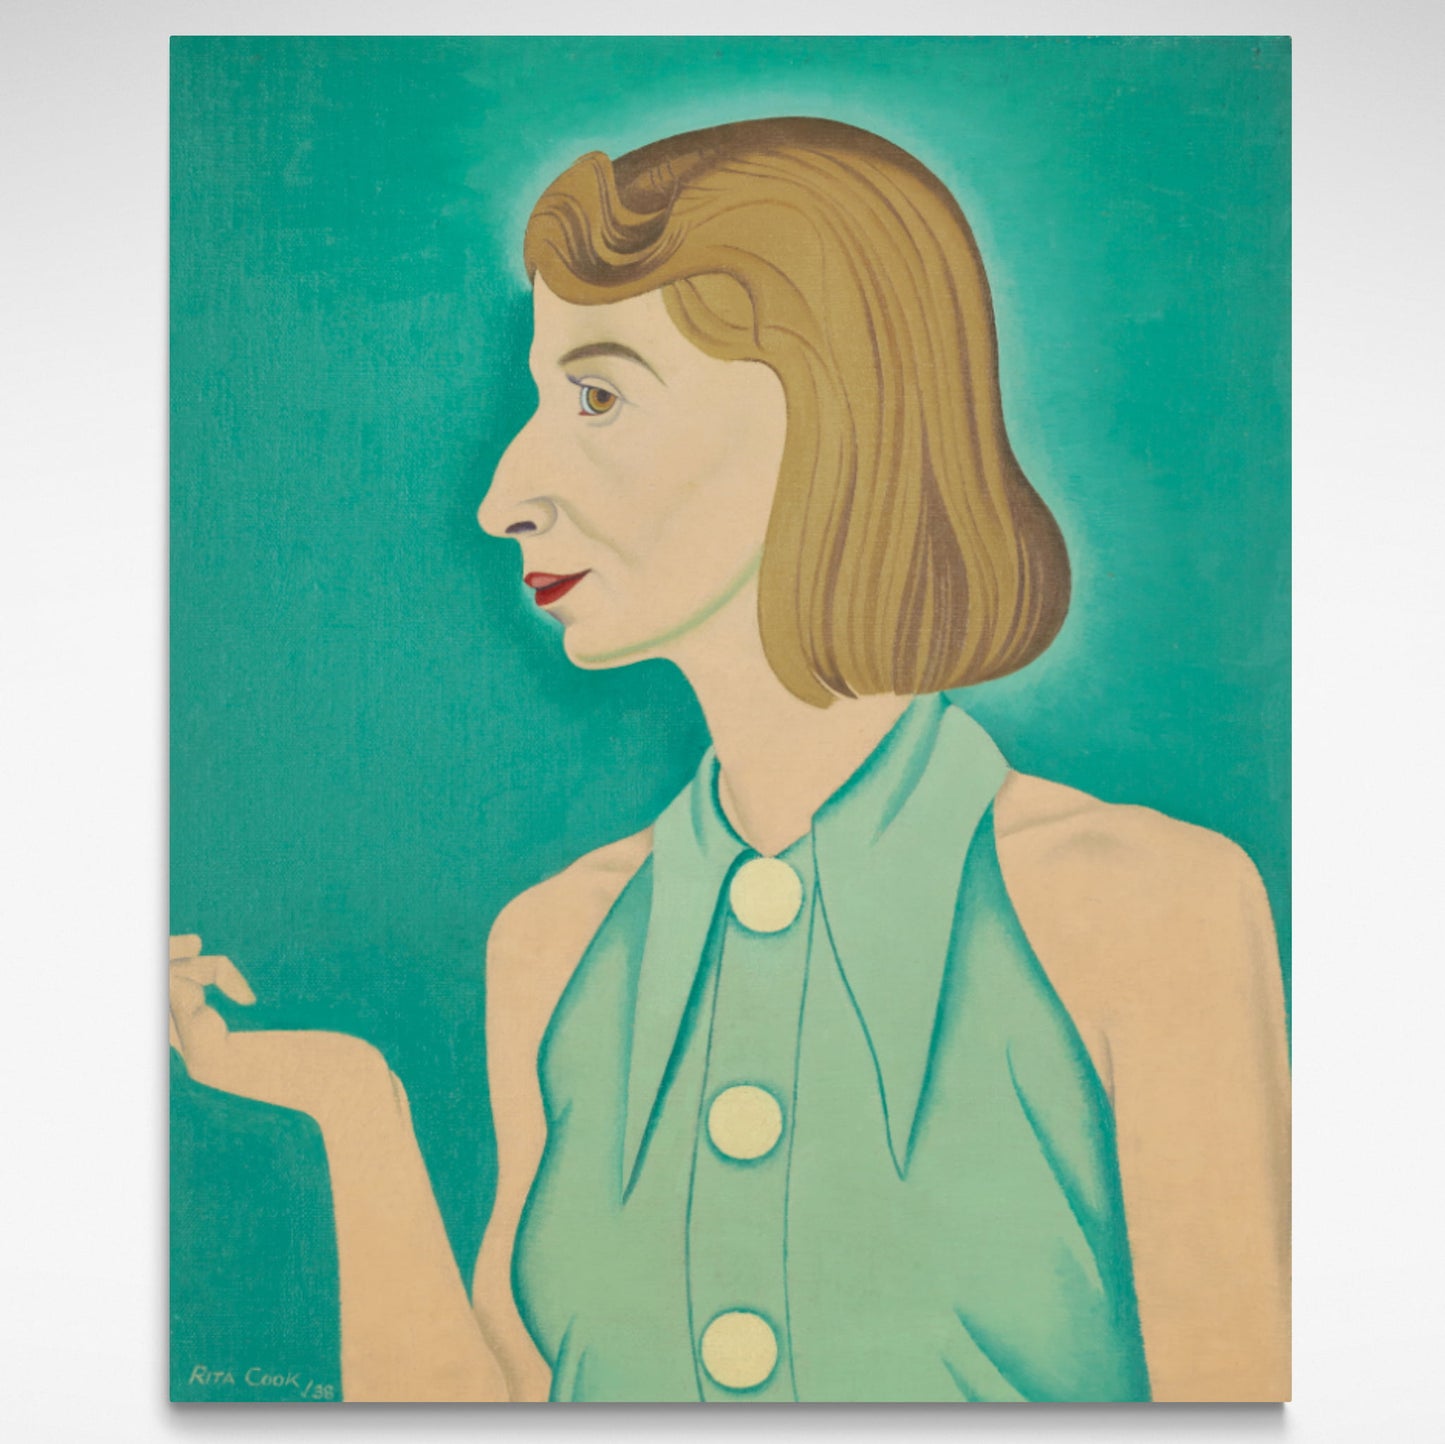 Side on self portrait of Rita Angus in a Cleaoptra pose, on a vivid viridian green bacgound.